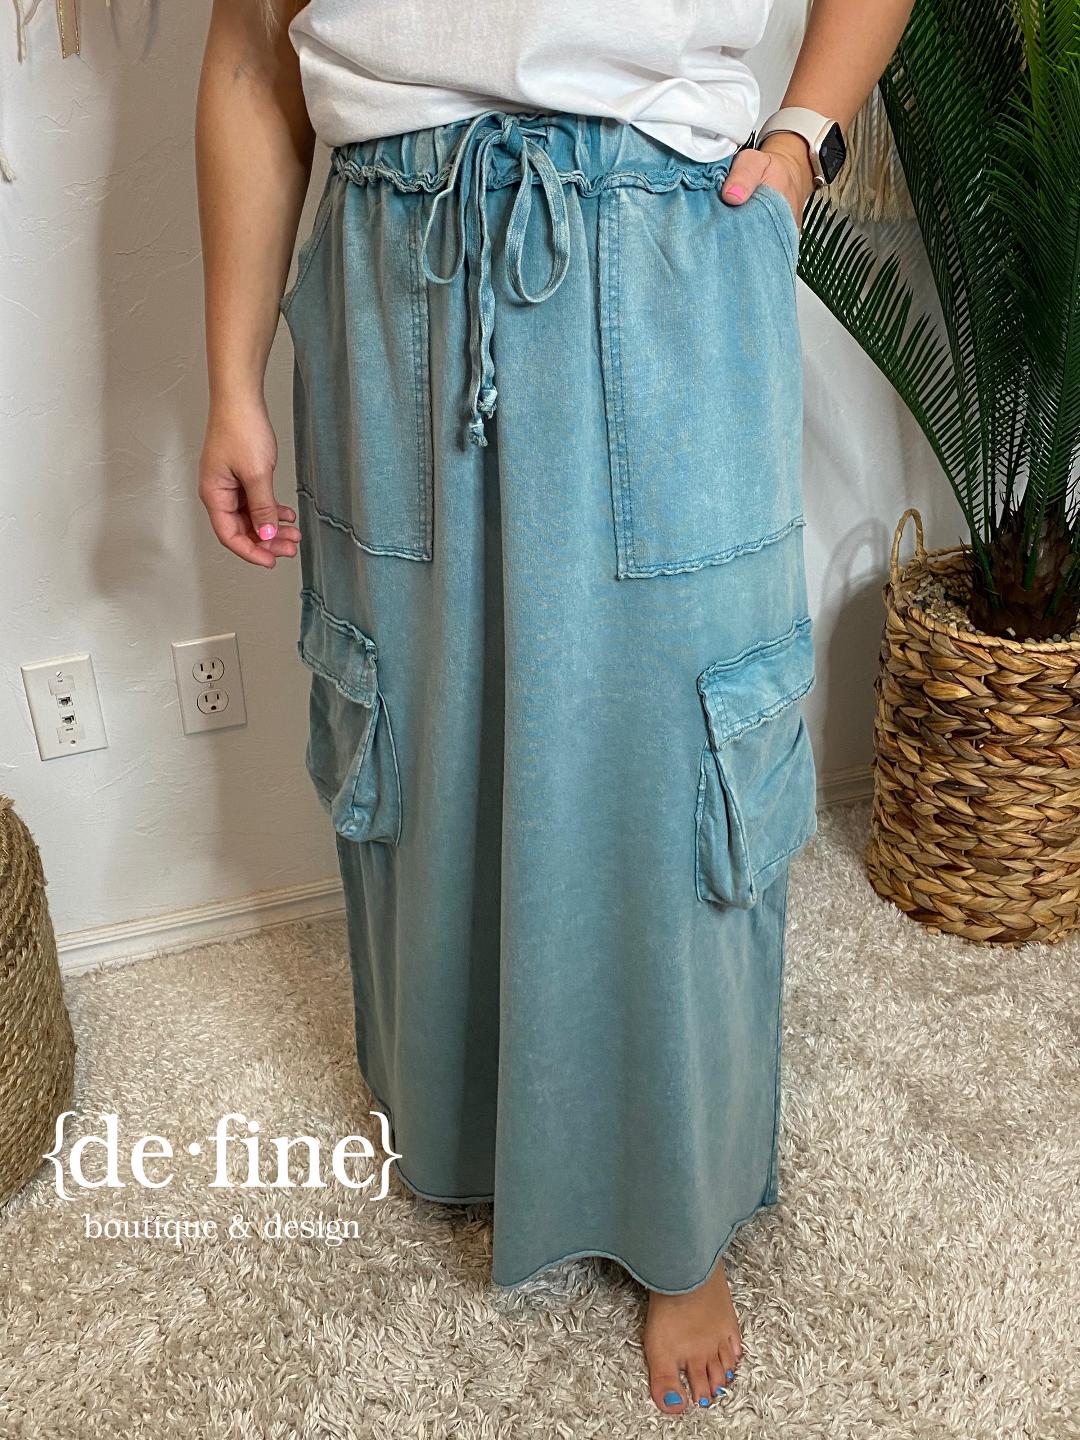 Mineral Washed Cargo Skirt in Regular & Curvy - Several colors!